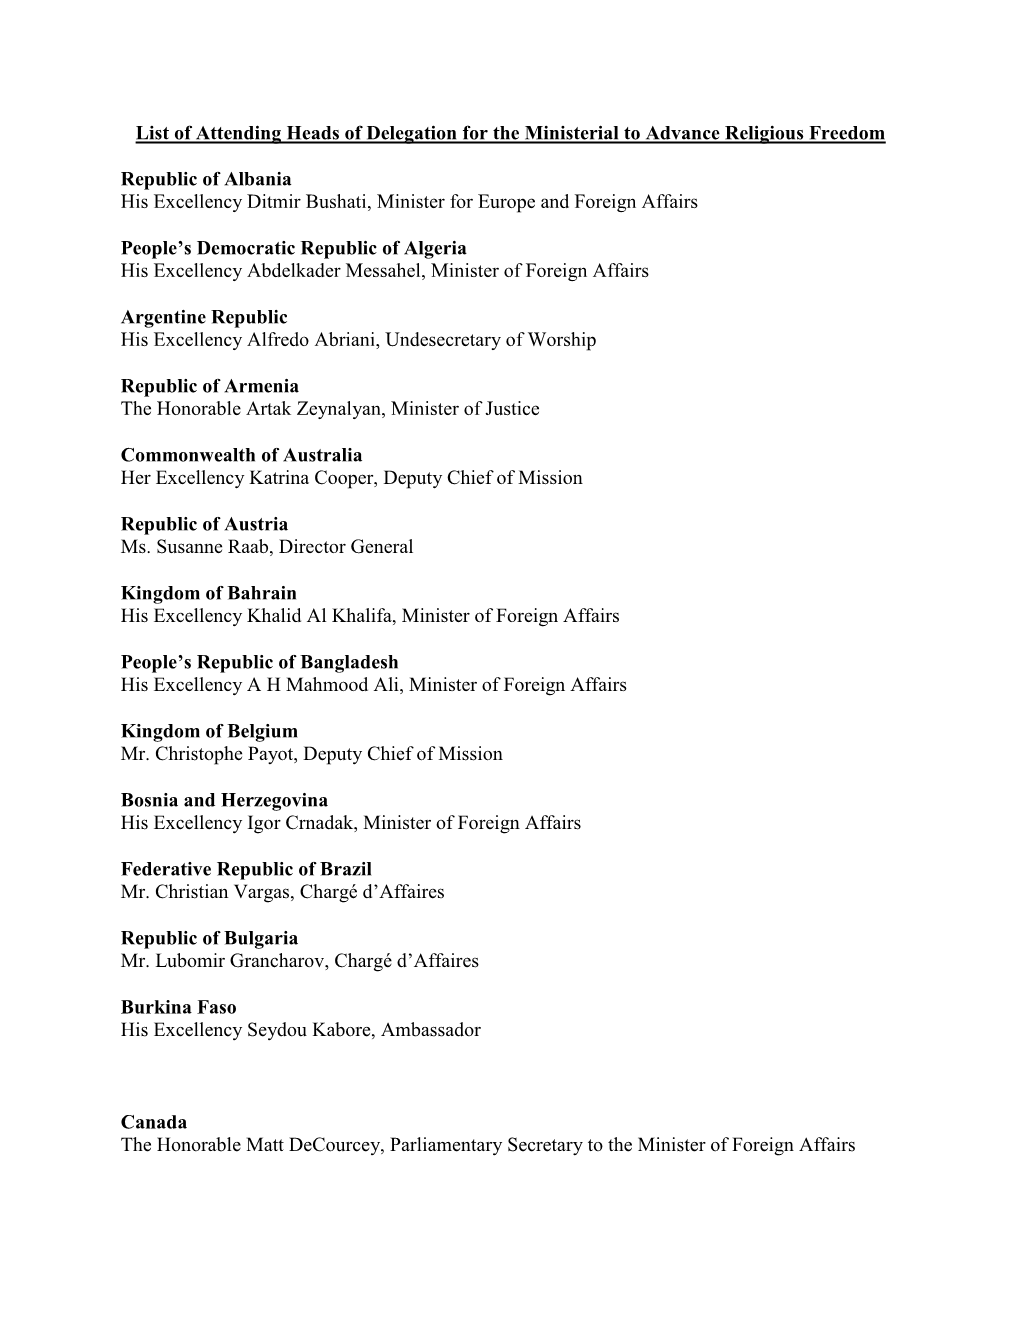 List of Attending Heads of Delegation for the Ministerial to Advance Religious Freedom